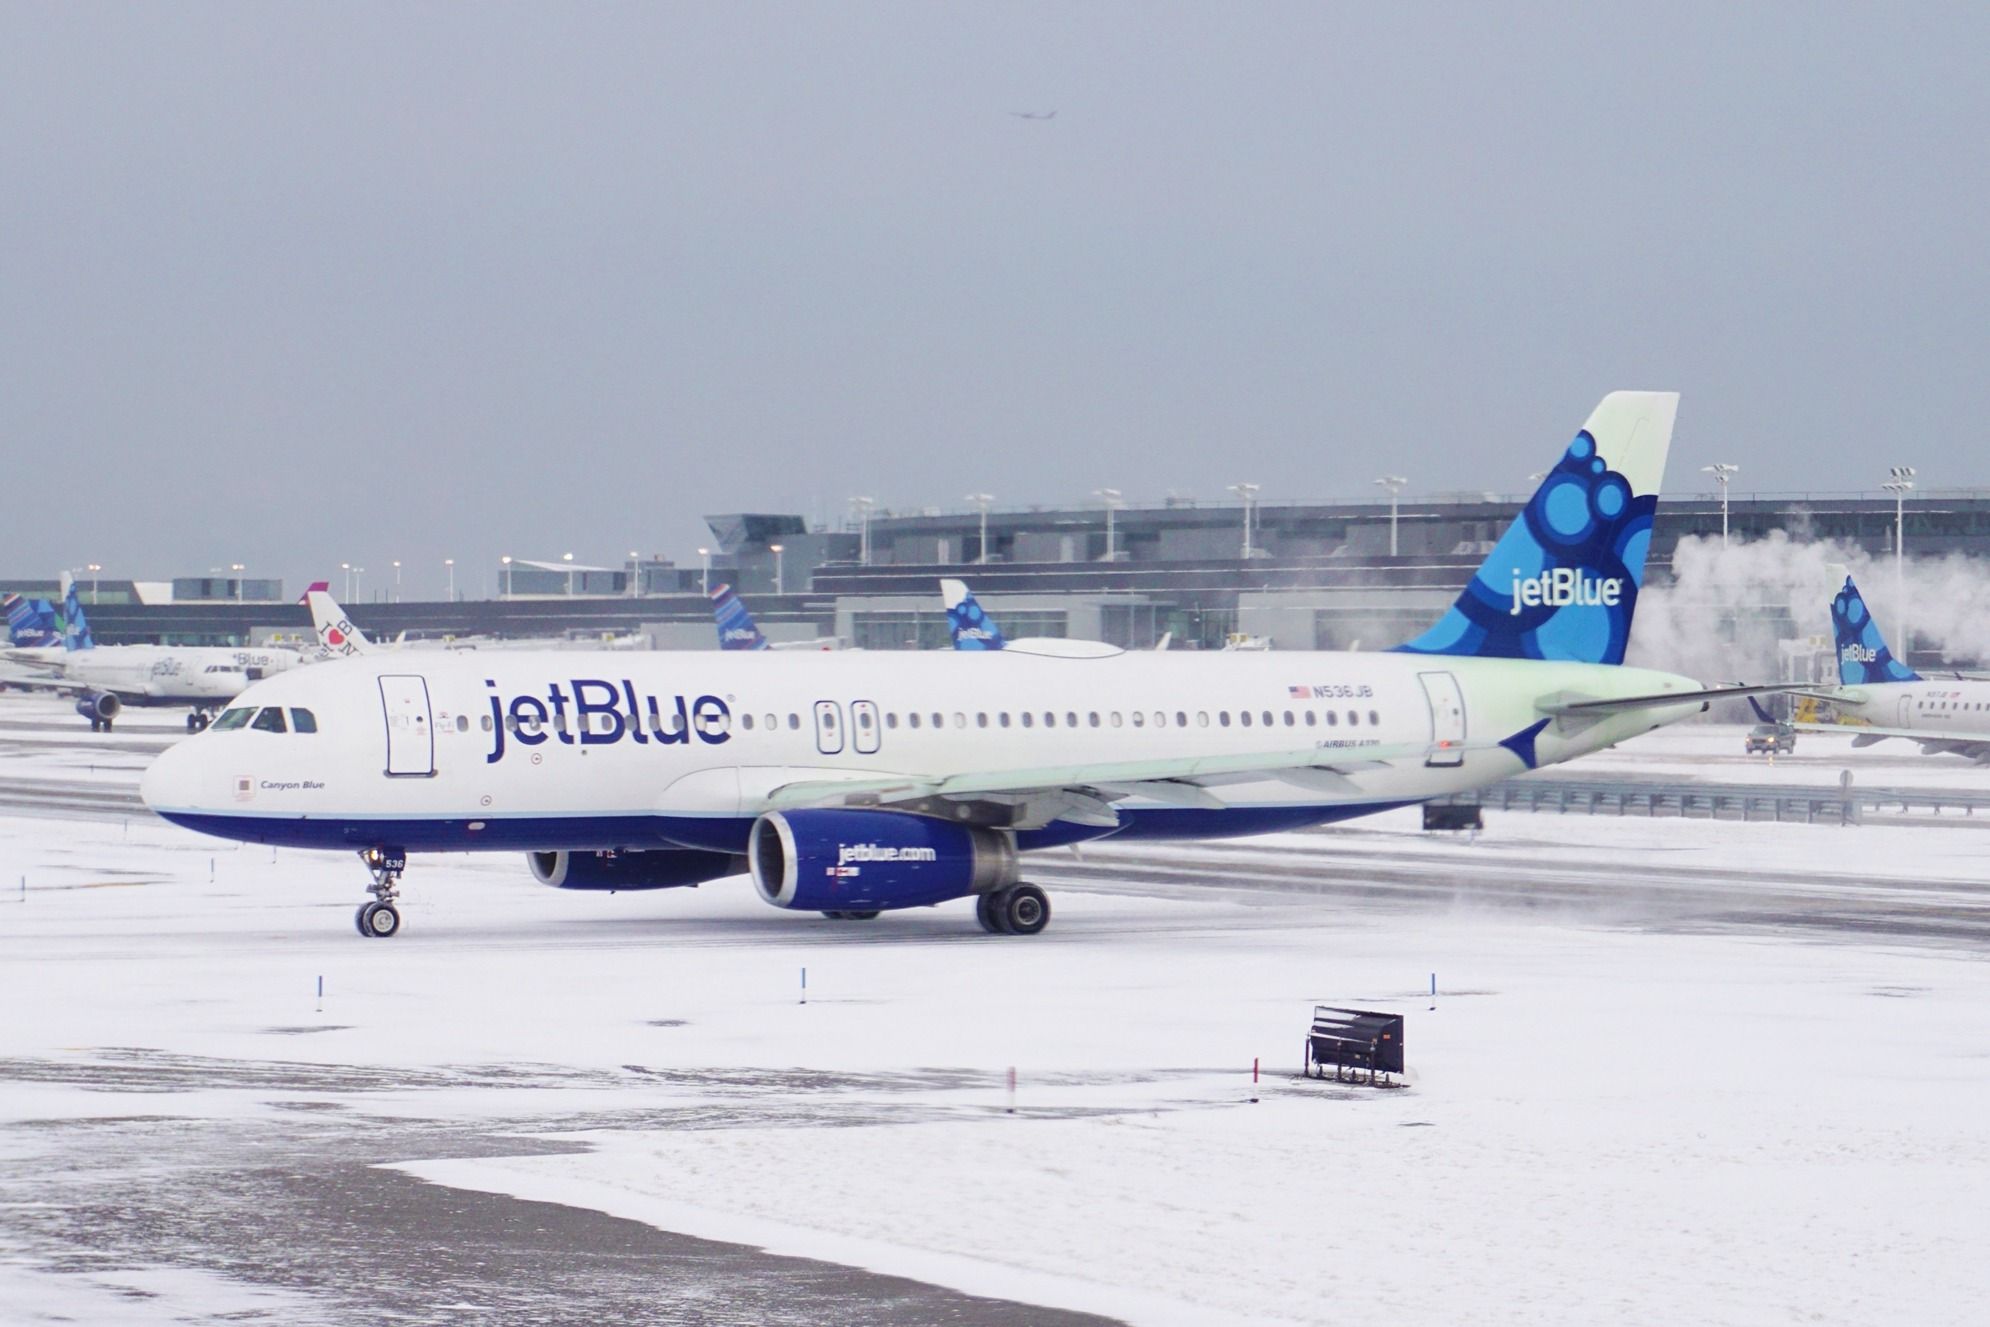 A JetBlue Airbus A320 on a wintery snowy airport apron.